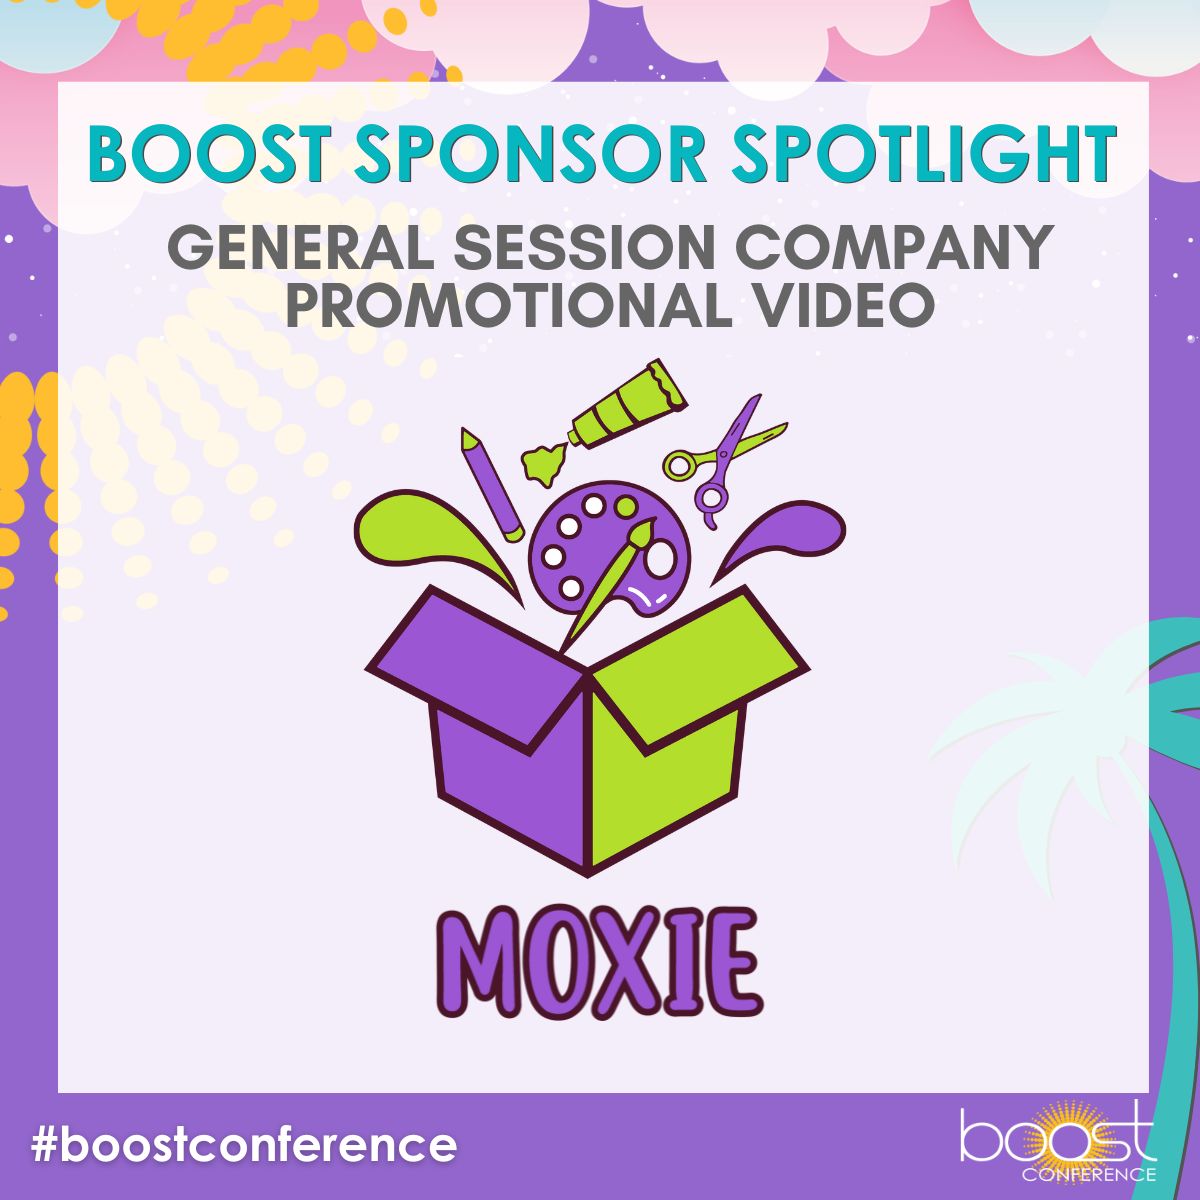 Our featured sponsor #MoxieBoxArt will be sharing a fun video during our General Session at the 2024 #boostconference in Palm Springs, CA. Learn more about their art curriculum and solutions for your programs. moxieboxart.com